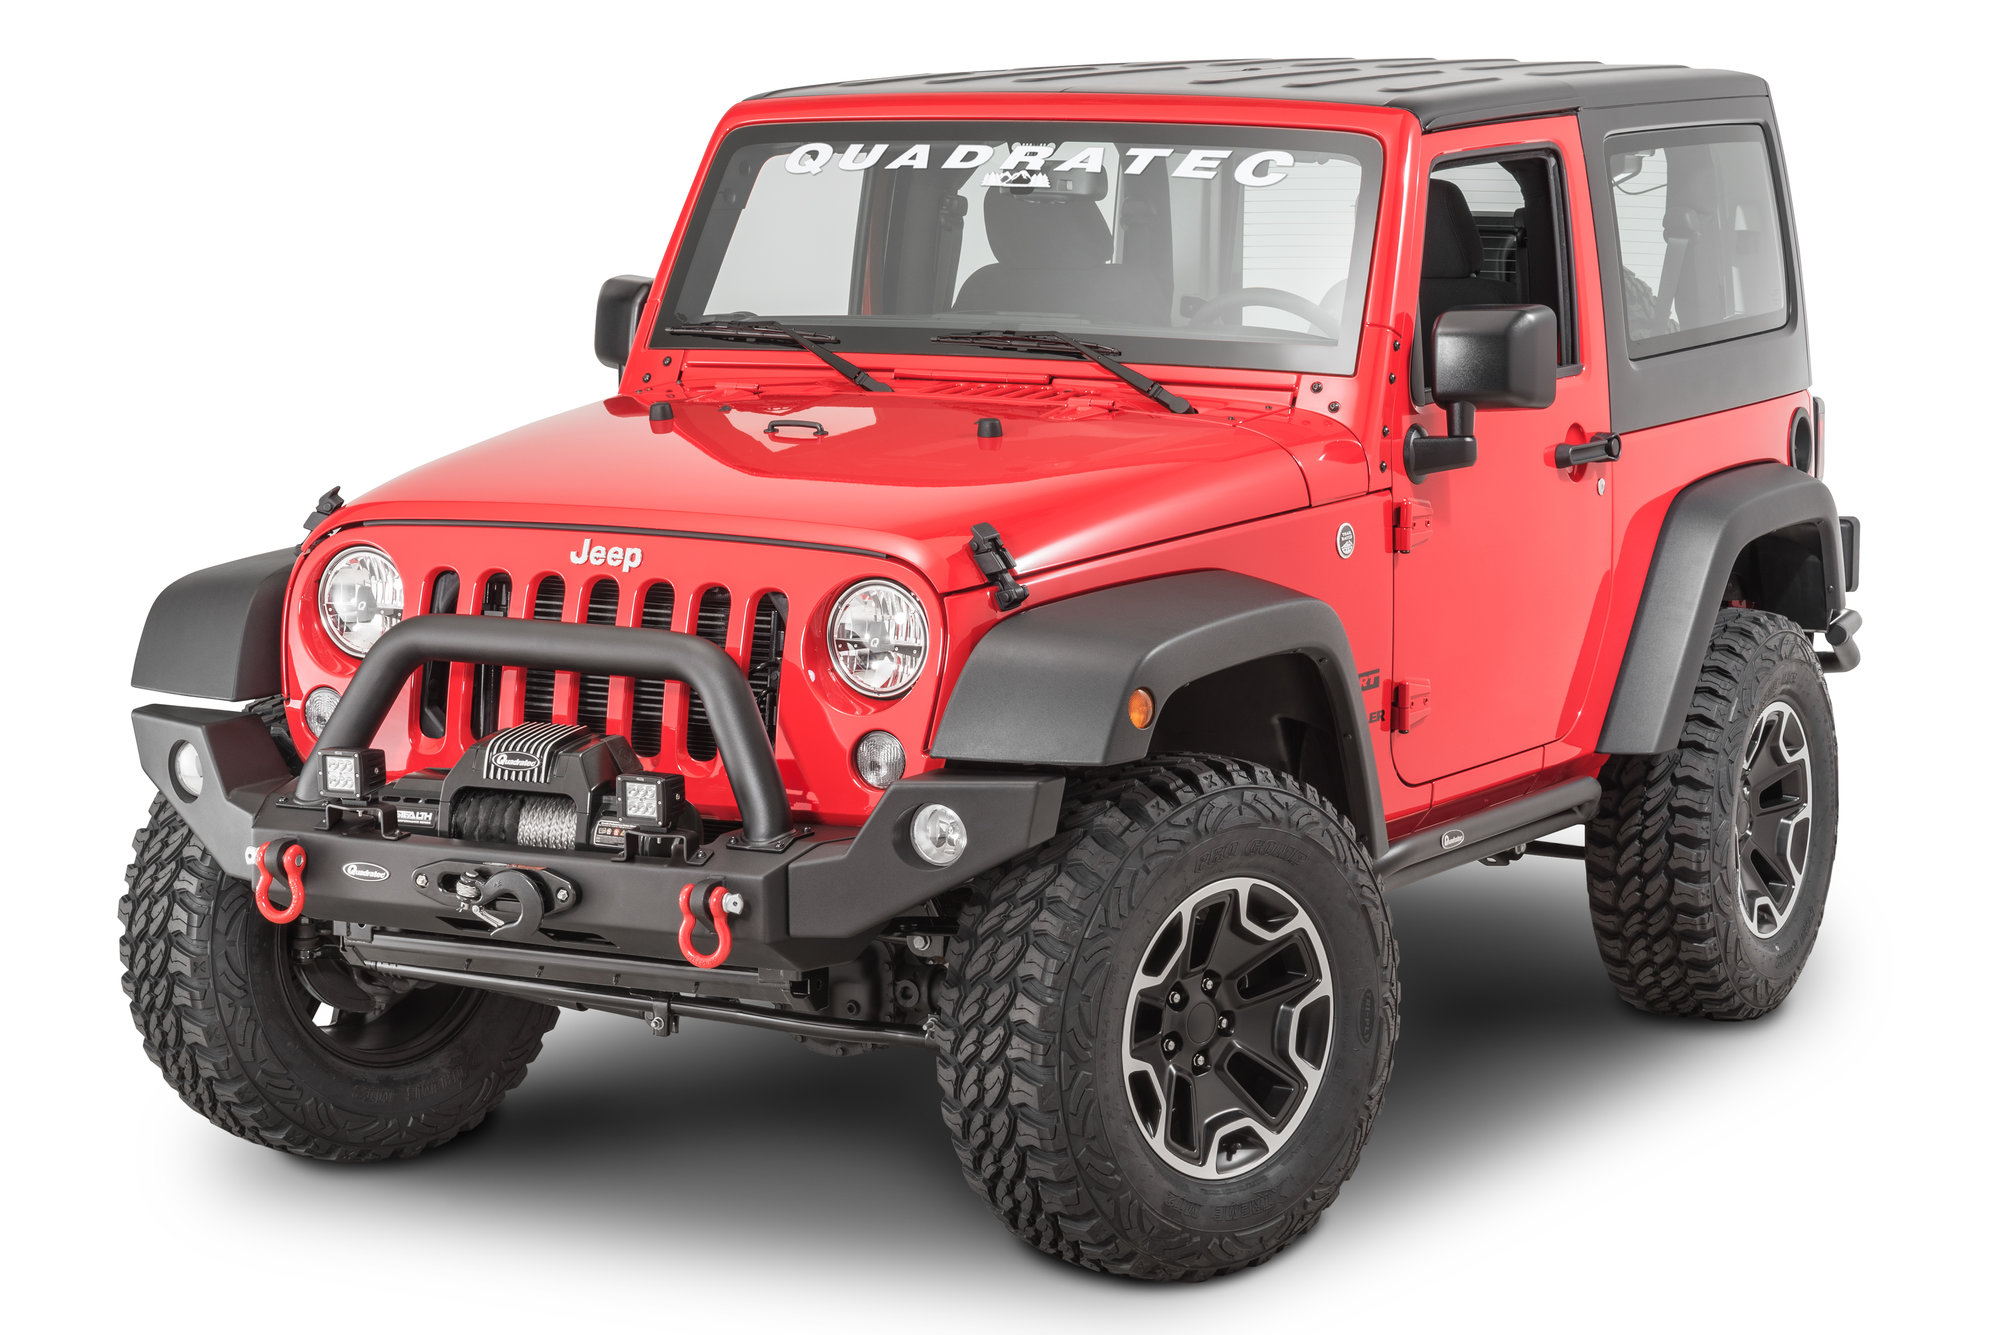 Ten Best Jeep Wrangler Mods For Any First-Time Owner | Quadratec